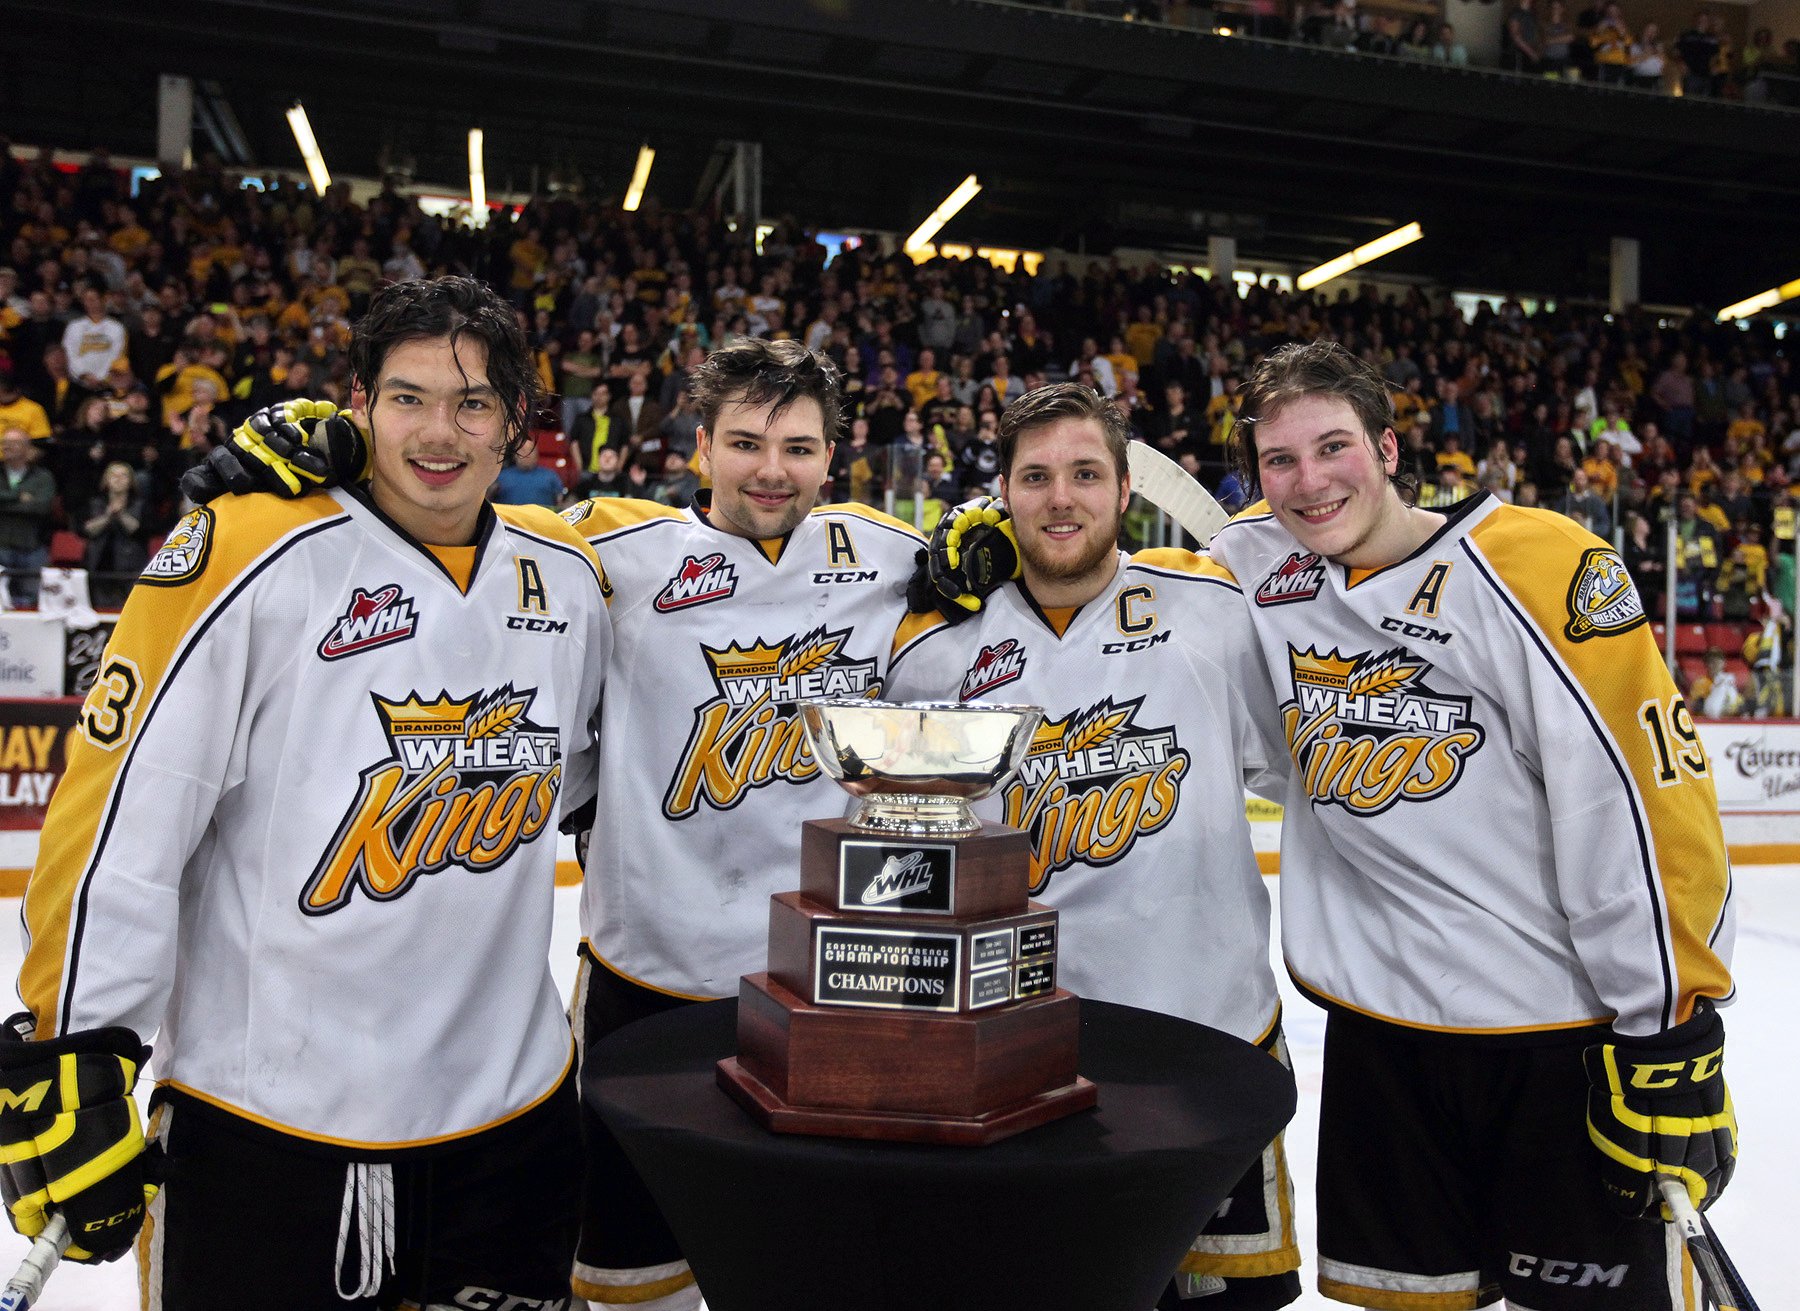 Brandon Wheat Kings on Twitter: "Your Brandon Wheat Kings are 2015-16  Eastern Conference Champions! Next up the WHL Finals! #GoldRush #bdnmb  https://t.co/tZvUKt48OI" / X